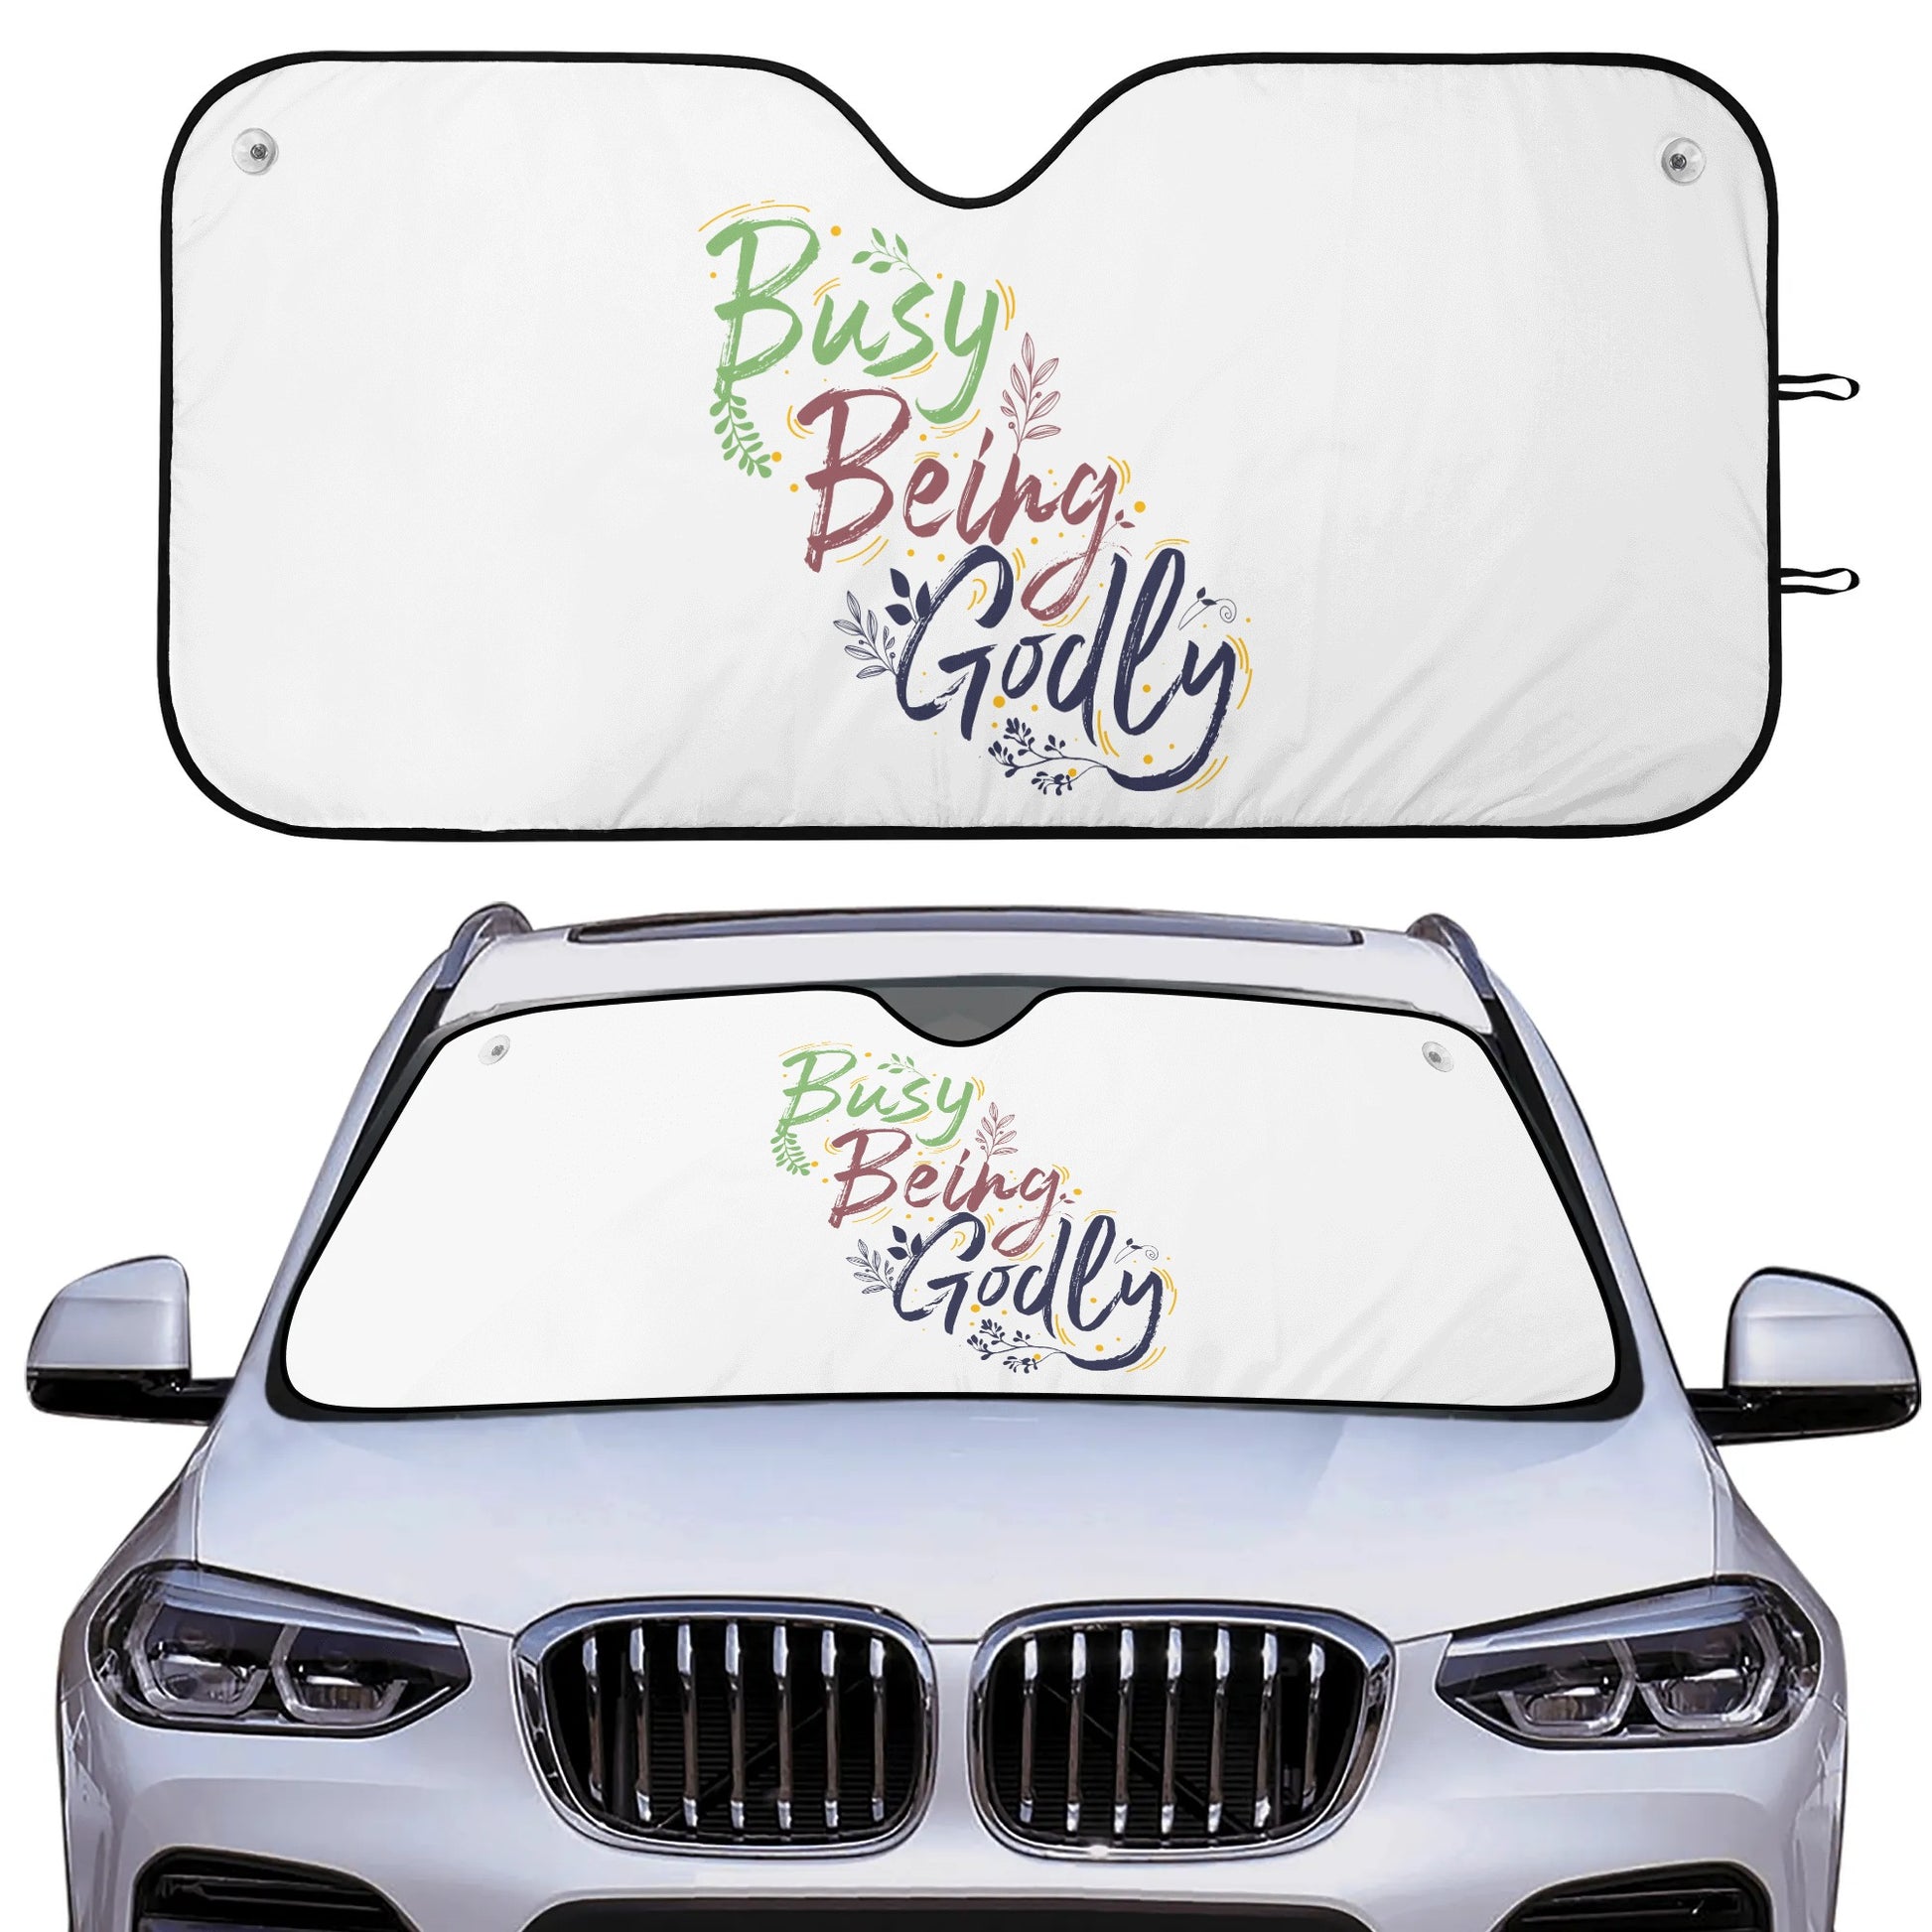 Busy Being Godly Car Sunshade Christian Car Accessories popcustoms